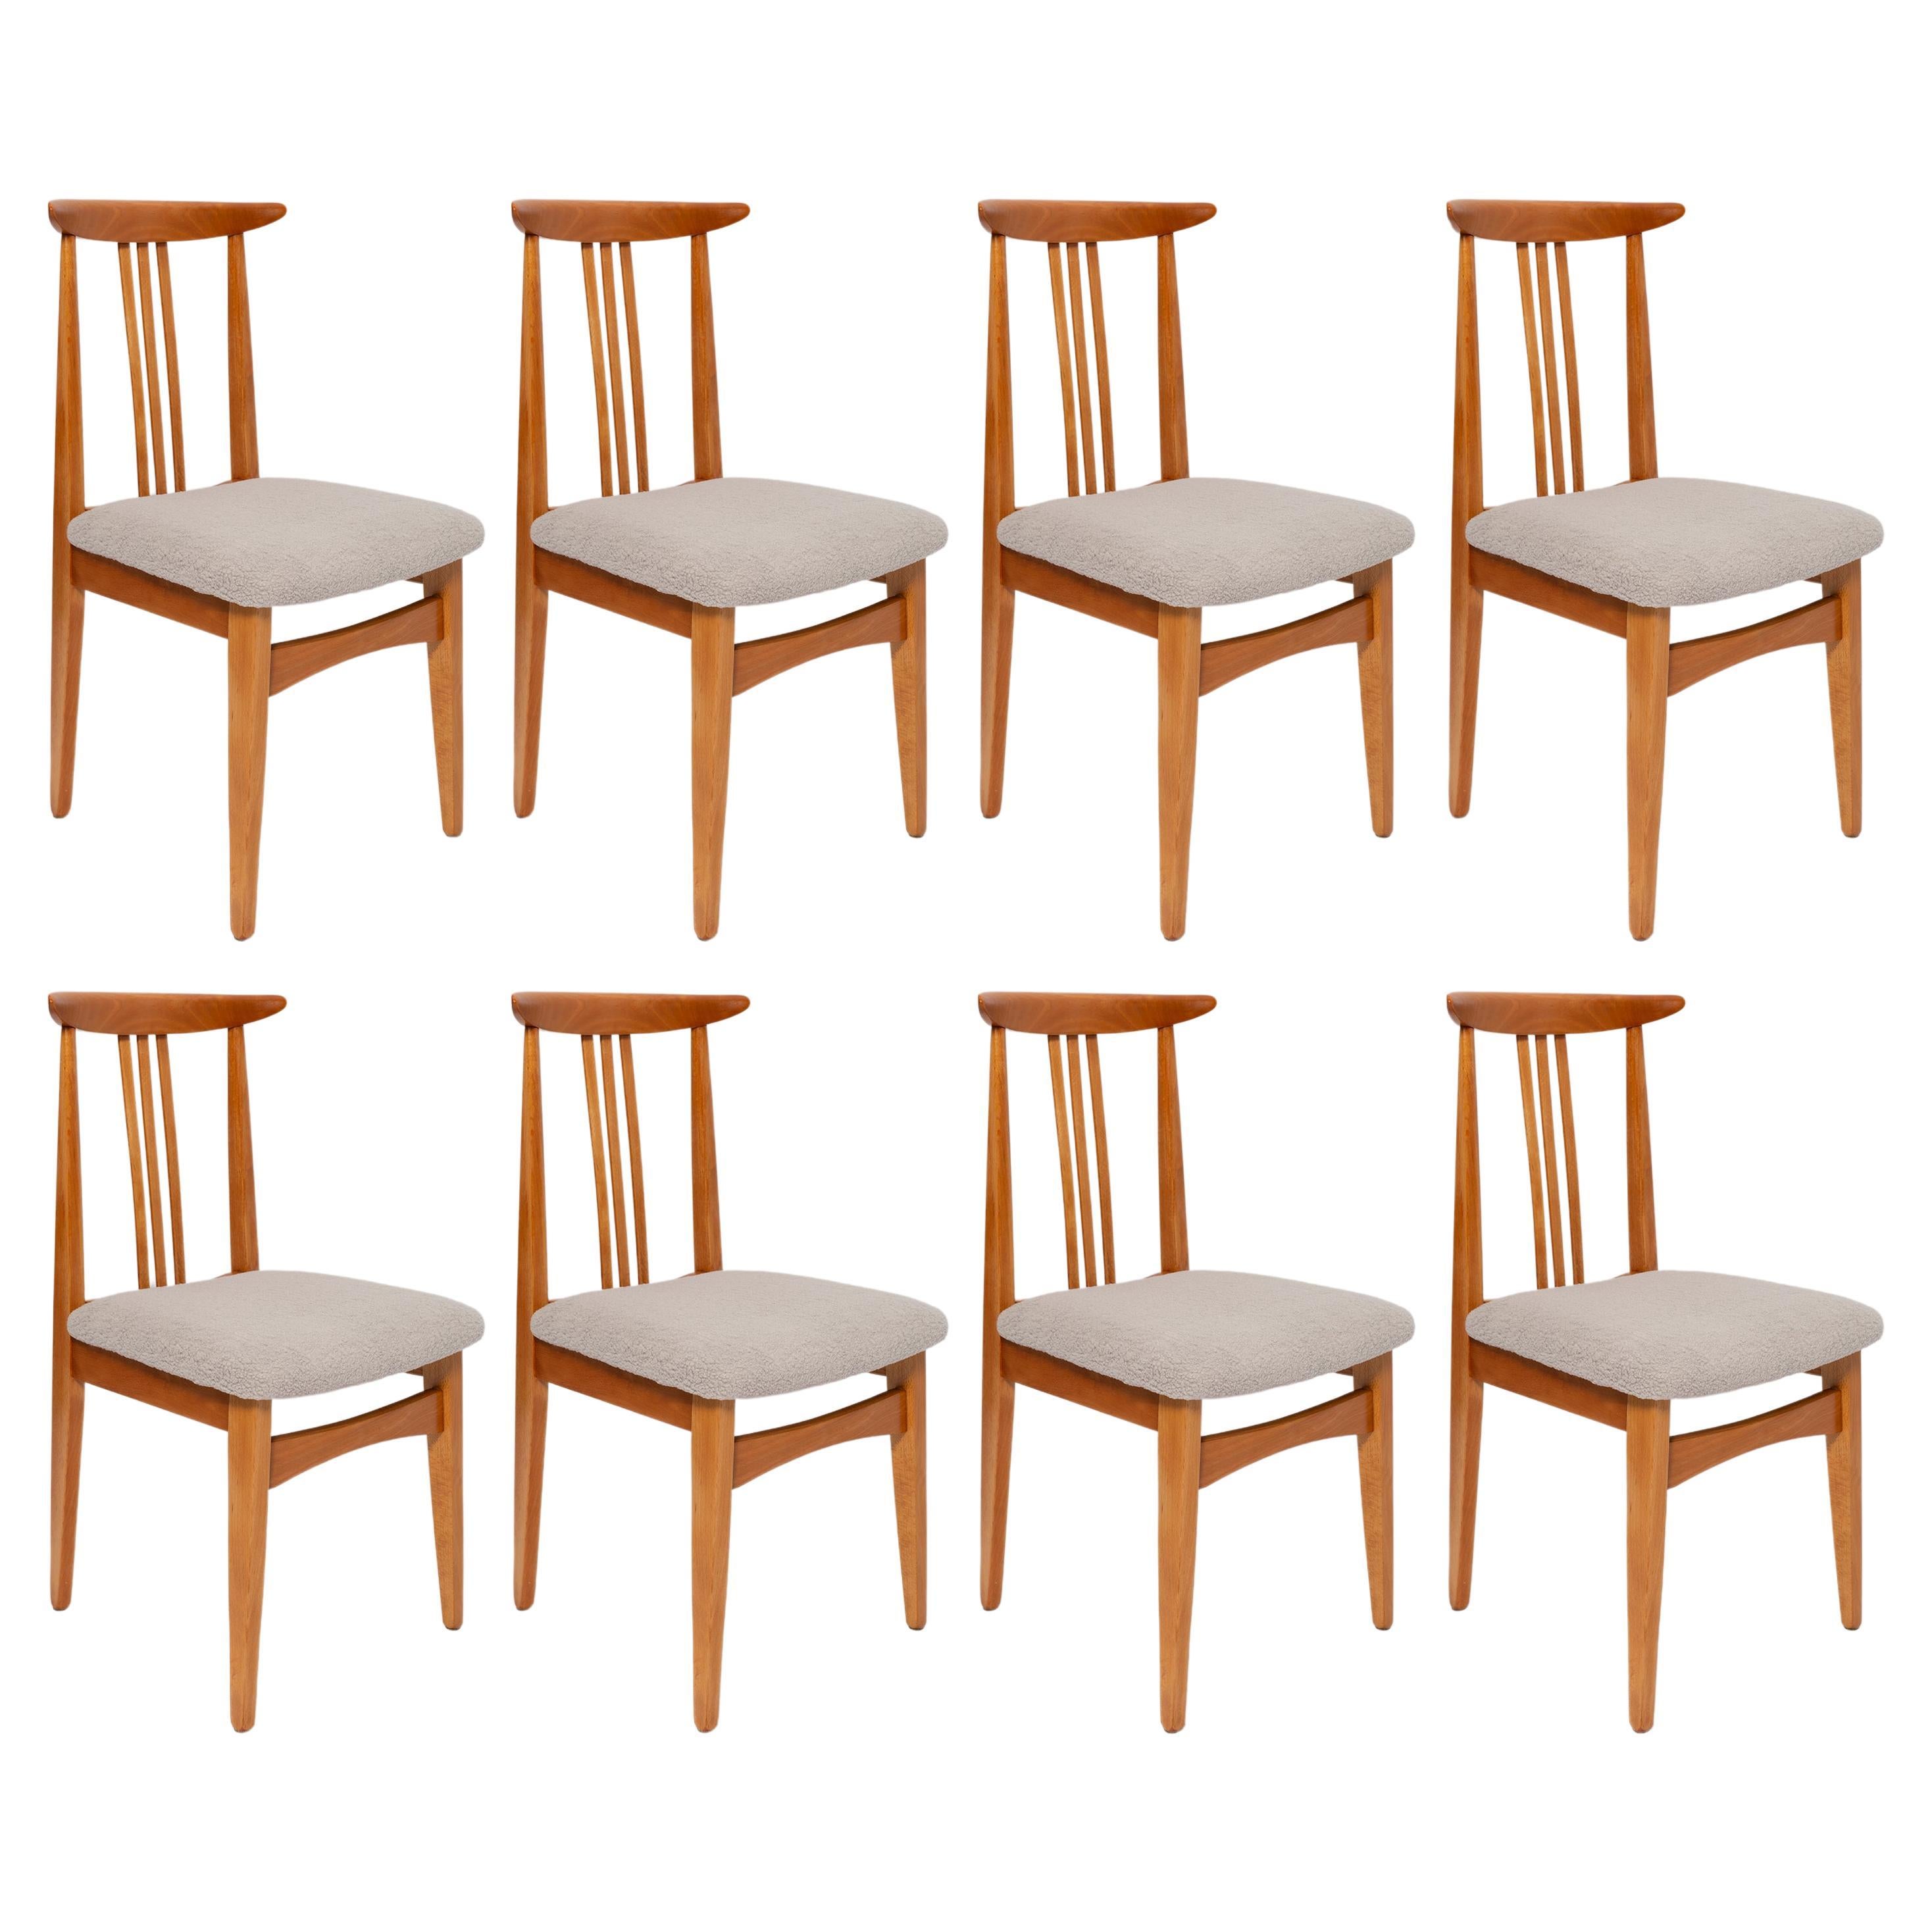 Set of Eight Mid-Century Linen Boucle Chairs, by M. Zielinski, Europe, 1960s